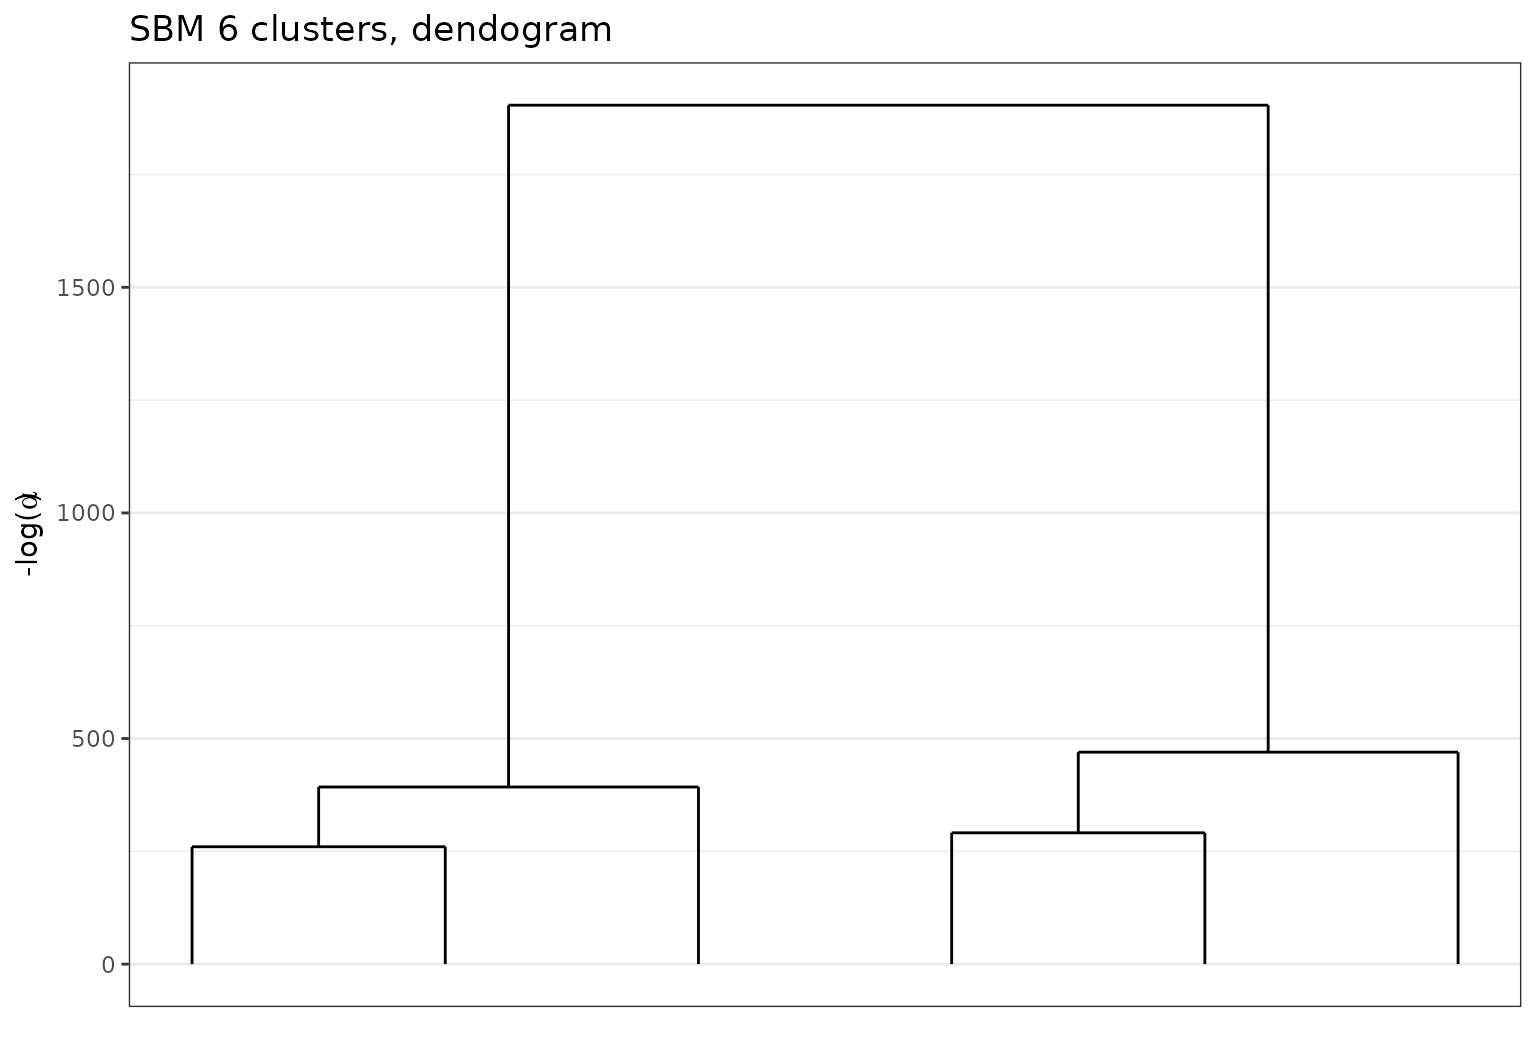 Dendogram representation of the greed result on the simulated Sbm data.